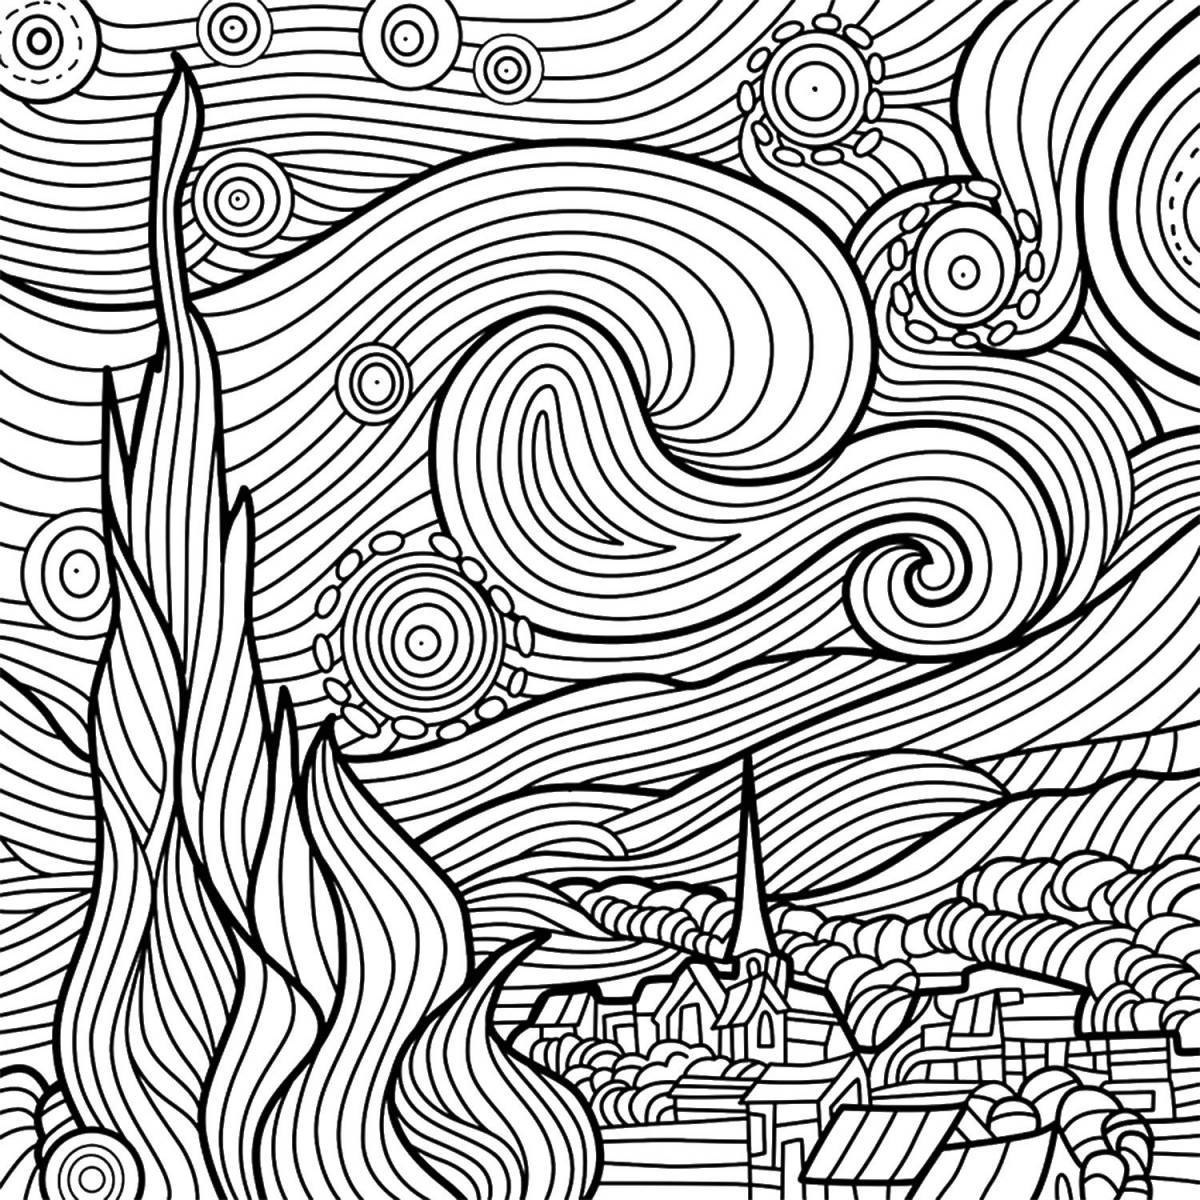 Glowing Spiral Pattern Coloring Page